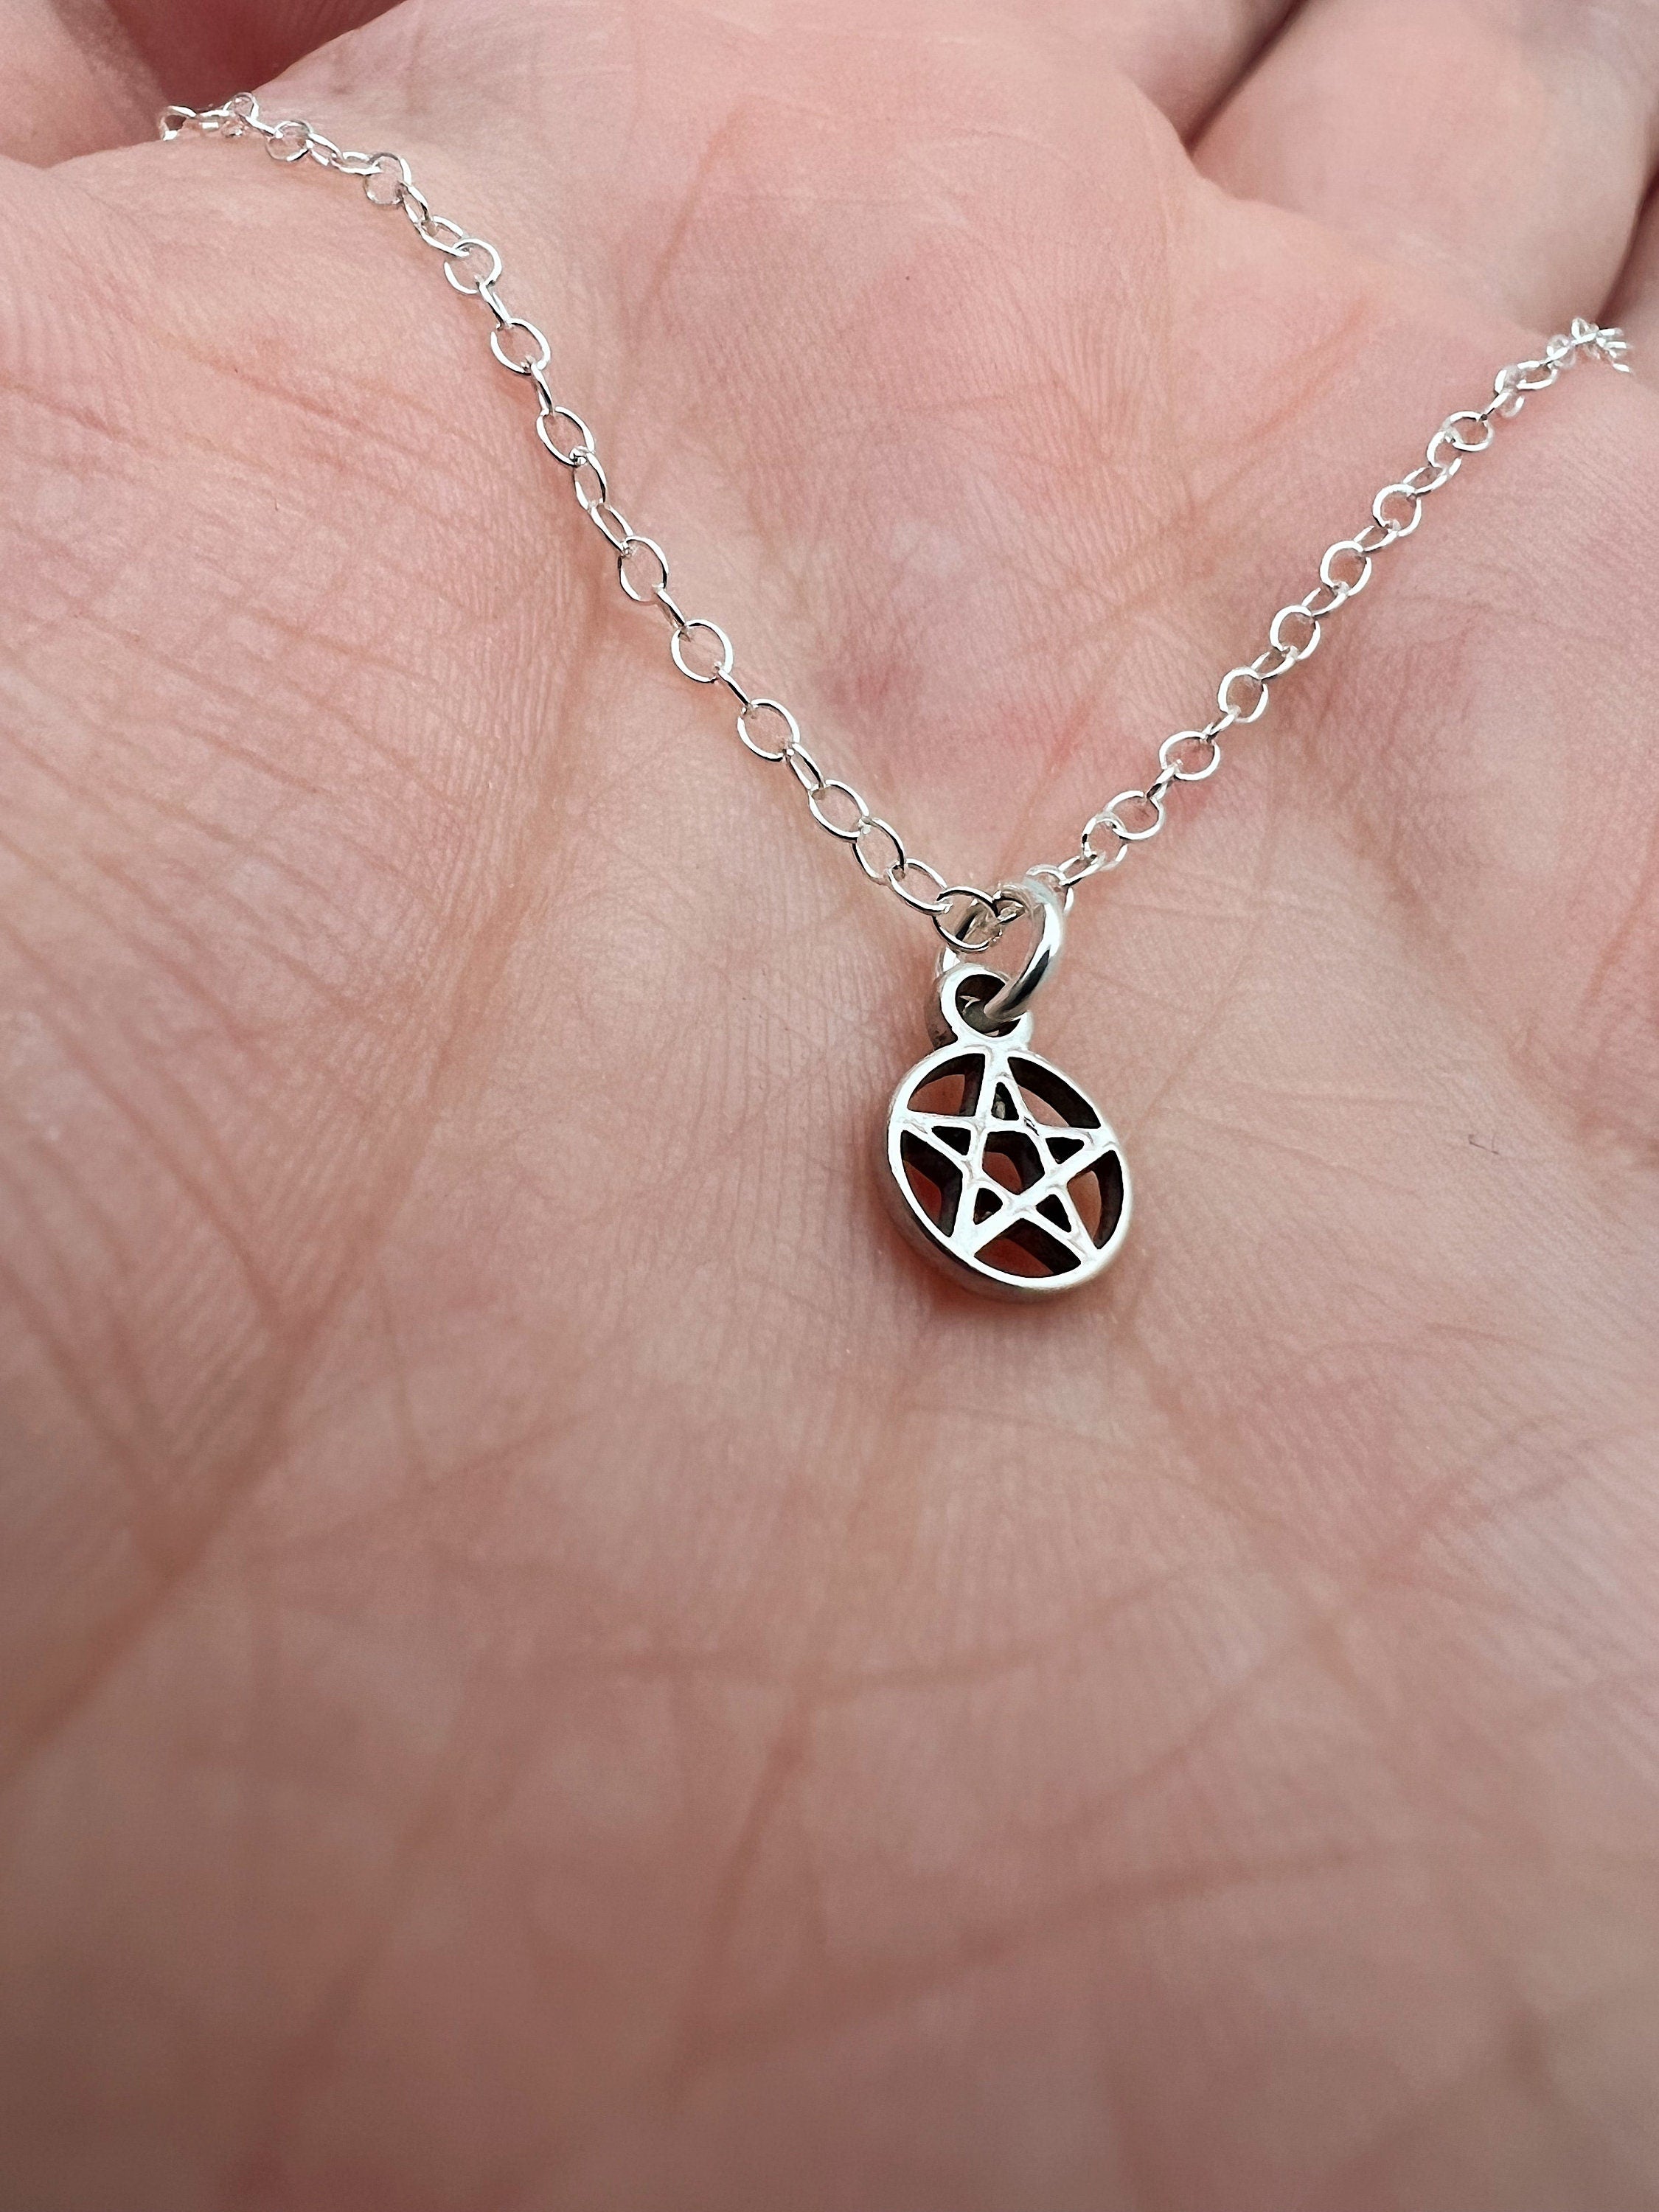 Dainty Pentacle Charm Necklace | Best Friend Birthday Gift | Halloween Necklace | Mystic Pagan Jewelry | Wiccan Necklace | Witchcore Jewelry